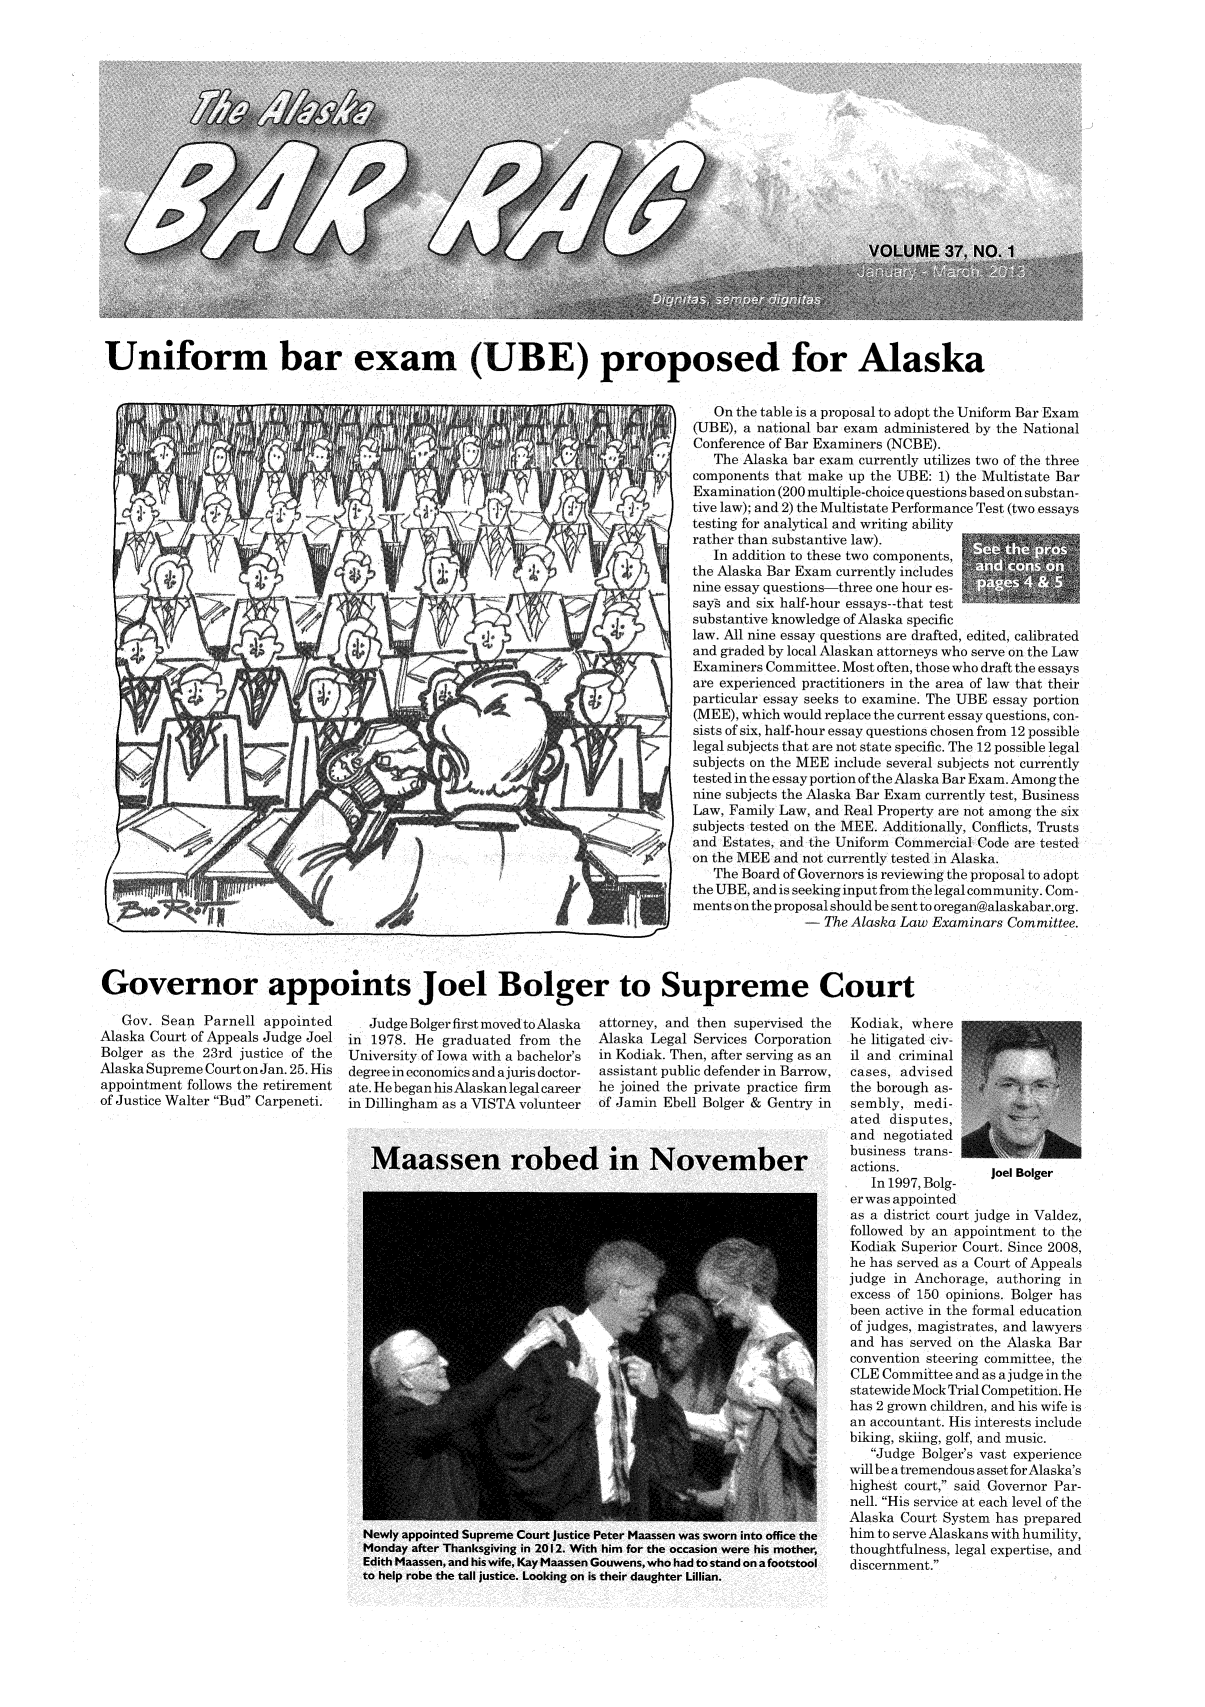 handle is hein.barjournals/askabar0037 and id is 1 raw text is: Uniform bar exam (UBE) proposed for Alaska
On the table is a proposal to adopt the Uniform Bar Exam
(UBE), a national bar exam administered by the National
Conference of Bar Examiners (NCBE).
The Alaska bar exam currently utilizes two of the three
Y/ p;  components that make up the UBE: 1) the Multistate Bar
Examination (200 multiple-choice questions based on substan-
tive law); and 2) the Multistate Performance Test (two essays
testing for analytical and writing ability
rather than substantive law).
In addition to these two components,
the Alaska Bar Exam currently includes
nine essay questions  three one hour es-
4says and six half-hour essays--that test
substantive knowledge of Alaska specific
law. All nine essay questions are drafted, edited, calibrated
and graded by local Alaskan attorneys who serve on the Law
Examiners Committee. Most often, those who draft the essays
are experienced practitioners in the area of law that their
particular essay seeks to examine. The UBE essay portion
0(MEE), which would replace the current essay questions, con-
sists of six, half-hour essay questions chosen from 12 possible
>      legal subjects that are not state specific. The 12 possible legal
subjects on the MEE include several subjects not currently
tested in the essay portion of the Alaska Bar Exam. Among the
nine subjects the Alaska Bar Exam currently test, Business
Law, Family Law, and Real Property are not among the six
subjects tested on the MEE.'Additionally, Conflicts,'Trusts
A !  tand Estates, and the Uniform Commercial Code are tested
on the MEE and not currently tested in Alaska.
The Board of Governors is reviewing the proposal to adopt
the UBE, and is seeking input from the legal community. Com-
ments on the proposal should be sent to oregan@alaskabar.org.
- The Alaska Law Examinars Committee.
Governor appoints Joel Bolger to Supreme Court

Gov. Sean Parnell appointed
Alaska Court of Appeals Judge Joel
Bolger as the 23rd justice of the
Alaska Supreme Court on Jan. 25. His
appointment follows the retirement
of Justice Walter Bud Carpeneti.

Judge Bolger first moved to Alaska
in 1978. He graduated from the
University of Iowa with a bachelor's
degree in economics and ajuris doctor-
ate. He began his Alaskan legal career
in Dillingham as a VISTA volunteer

attorney, and then supervised the
Alaska Legal Services Corporation
in Kodiak. Then, after serving as an
assistant public defender in Barrow,
he joined the private practice firm
of Jamin Ebell Bolger & Gentry in

Kodiak, where
he litigated civ-
il and criminal
cases, advised
the borough as-                i
sembly, medi-                  i
ated disputes,
and negotiated
business trans-Af
actions.          Joel Bolger
In 1997, Bolg-
er was appointed
as a district court judge in Valdez,
followed by an appointment to the
Kodiak Superior Court. Since 2008,
he has served as a Court of Appeals
judge in Anchorage, authoring in
excess of 150 opinions. Bolger has
been active in the formal education
of judges, magistrates, and lawyers
and has served on the Alaska Bar
convention steering committee, the
CLE Committee and as a judge in the
statewide Mock Trial Competition. He
has 2 grown children, and his wife is
an accountant. His interests include
biking, skiing, golf, and music.
Judge Bolger's vast experience
will be a tremendous asset for Alaska's
highest court, said Governor Par-
nell. His service at each level of the
Alaska Court System has prepared
him to serve Alaskans with humility,
thoughtfulness, legal expertise, and
discernment.


